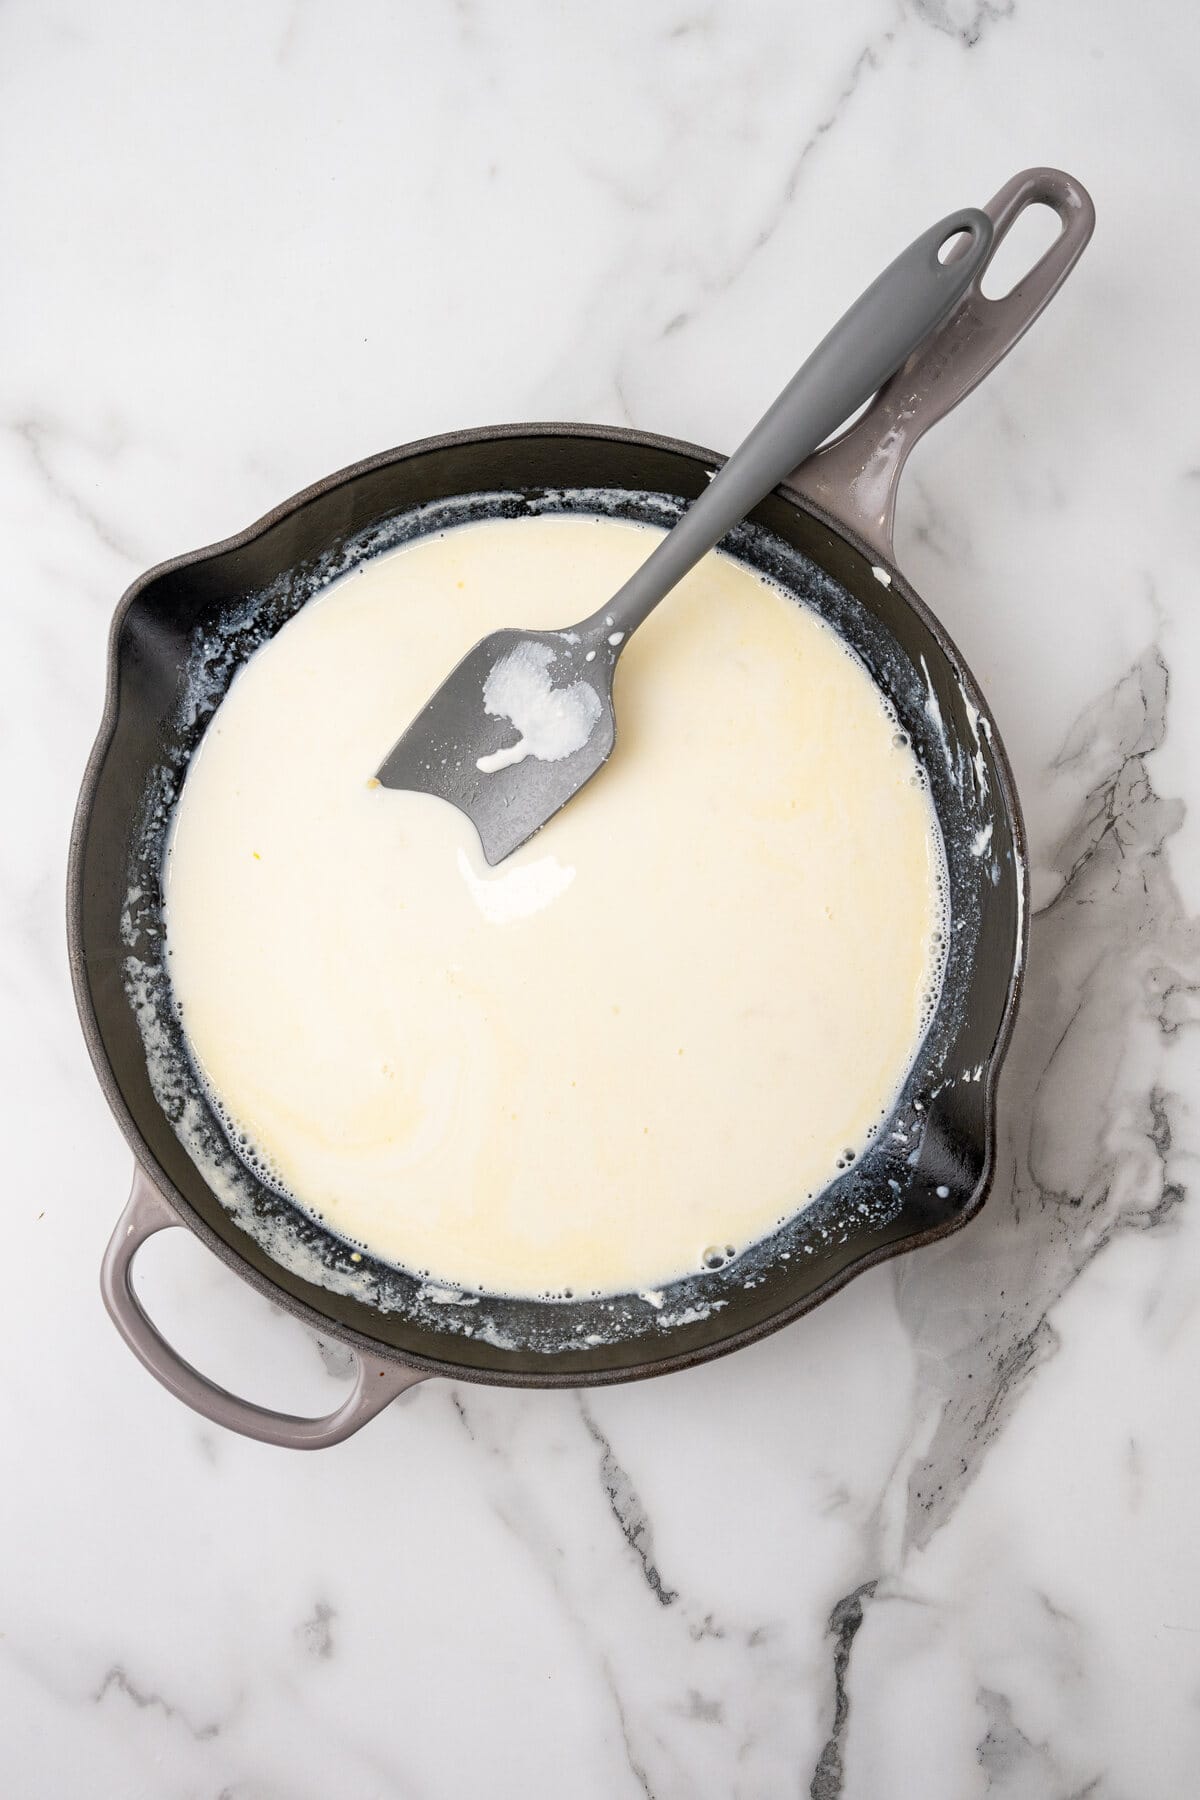 A cast iron skillet with melted butter, milk, and a spatula on a marble countertop.